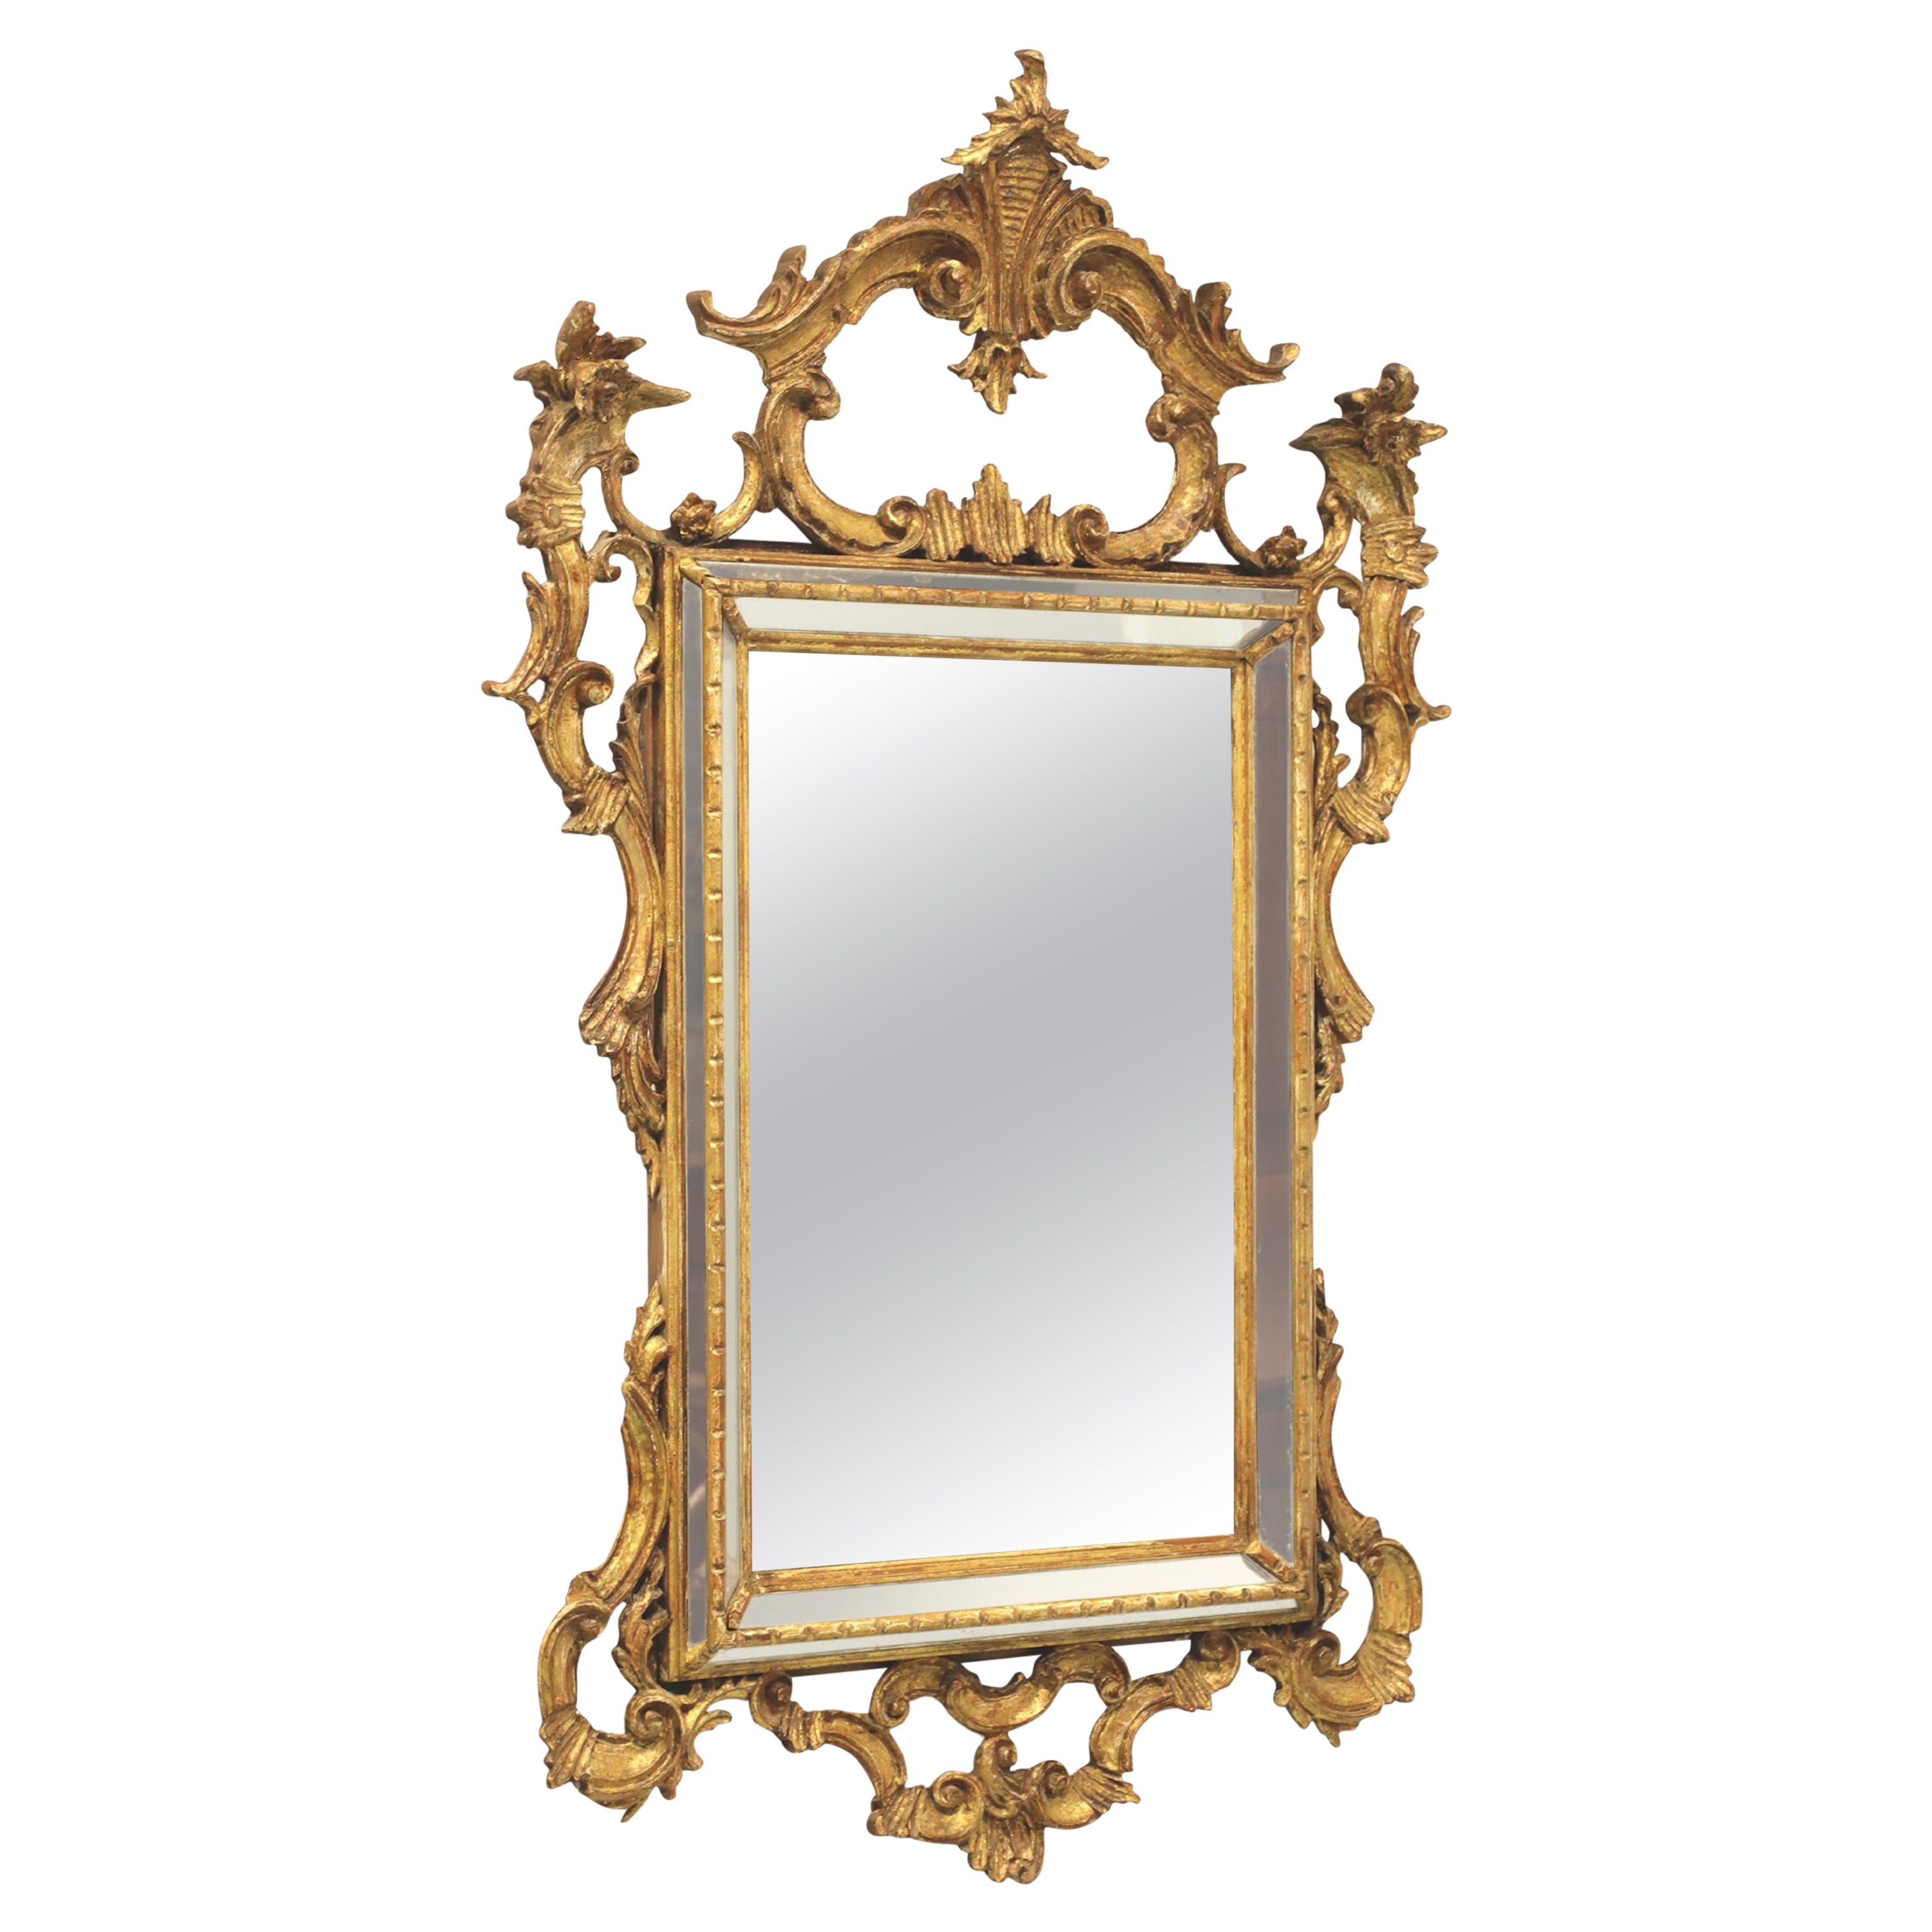 LABARGE 1960's Gold Carved French Louis XV Rococo Parclose Wall Mirror - A